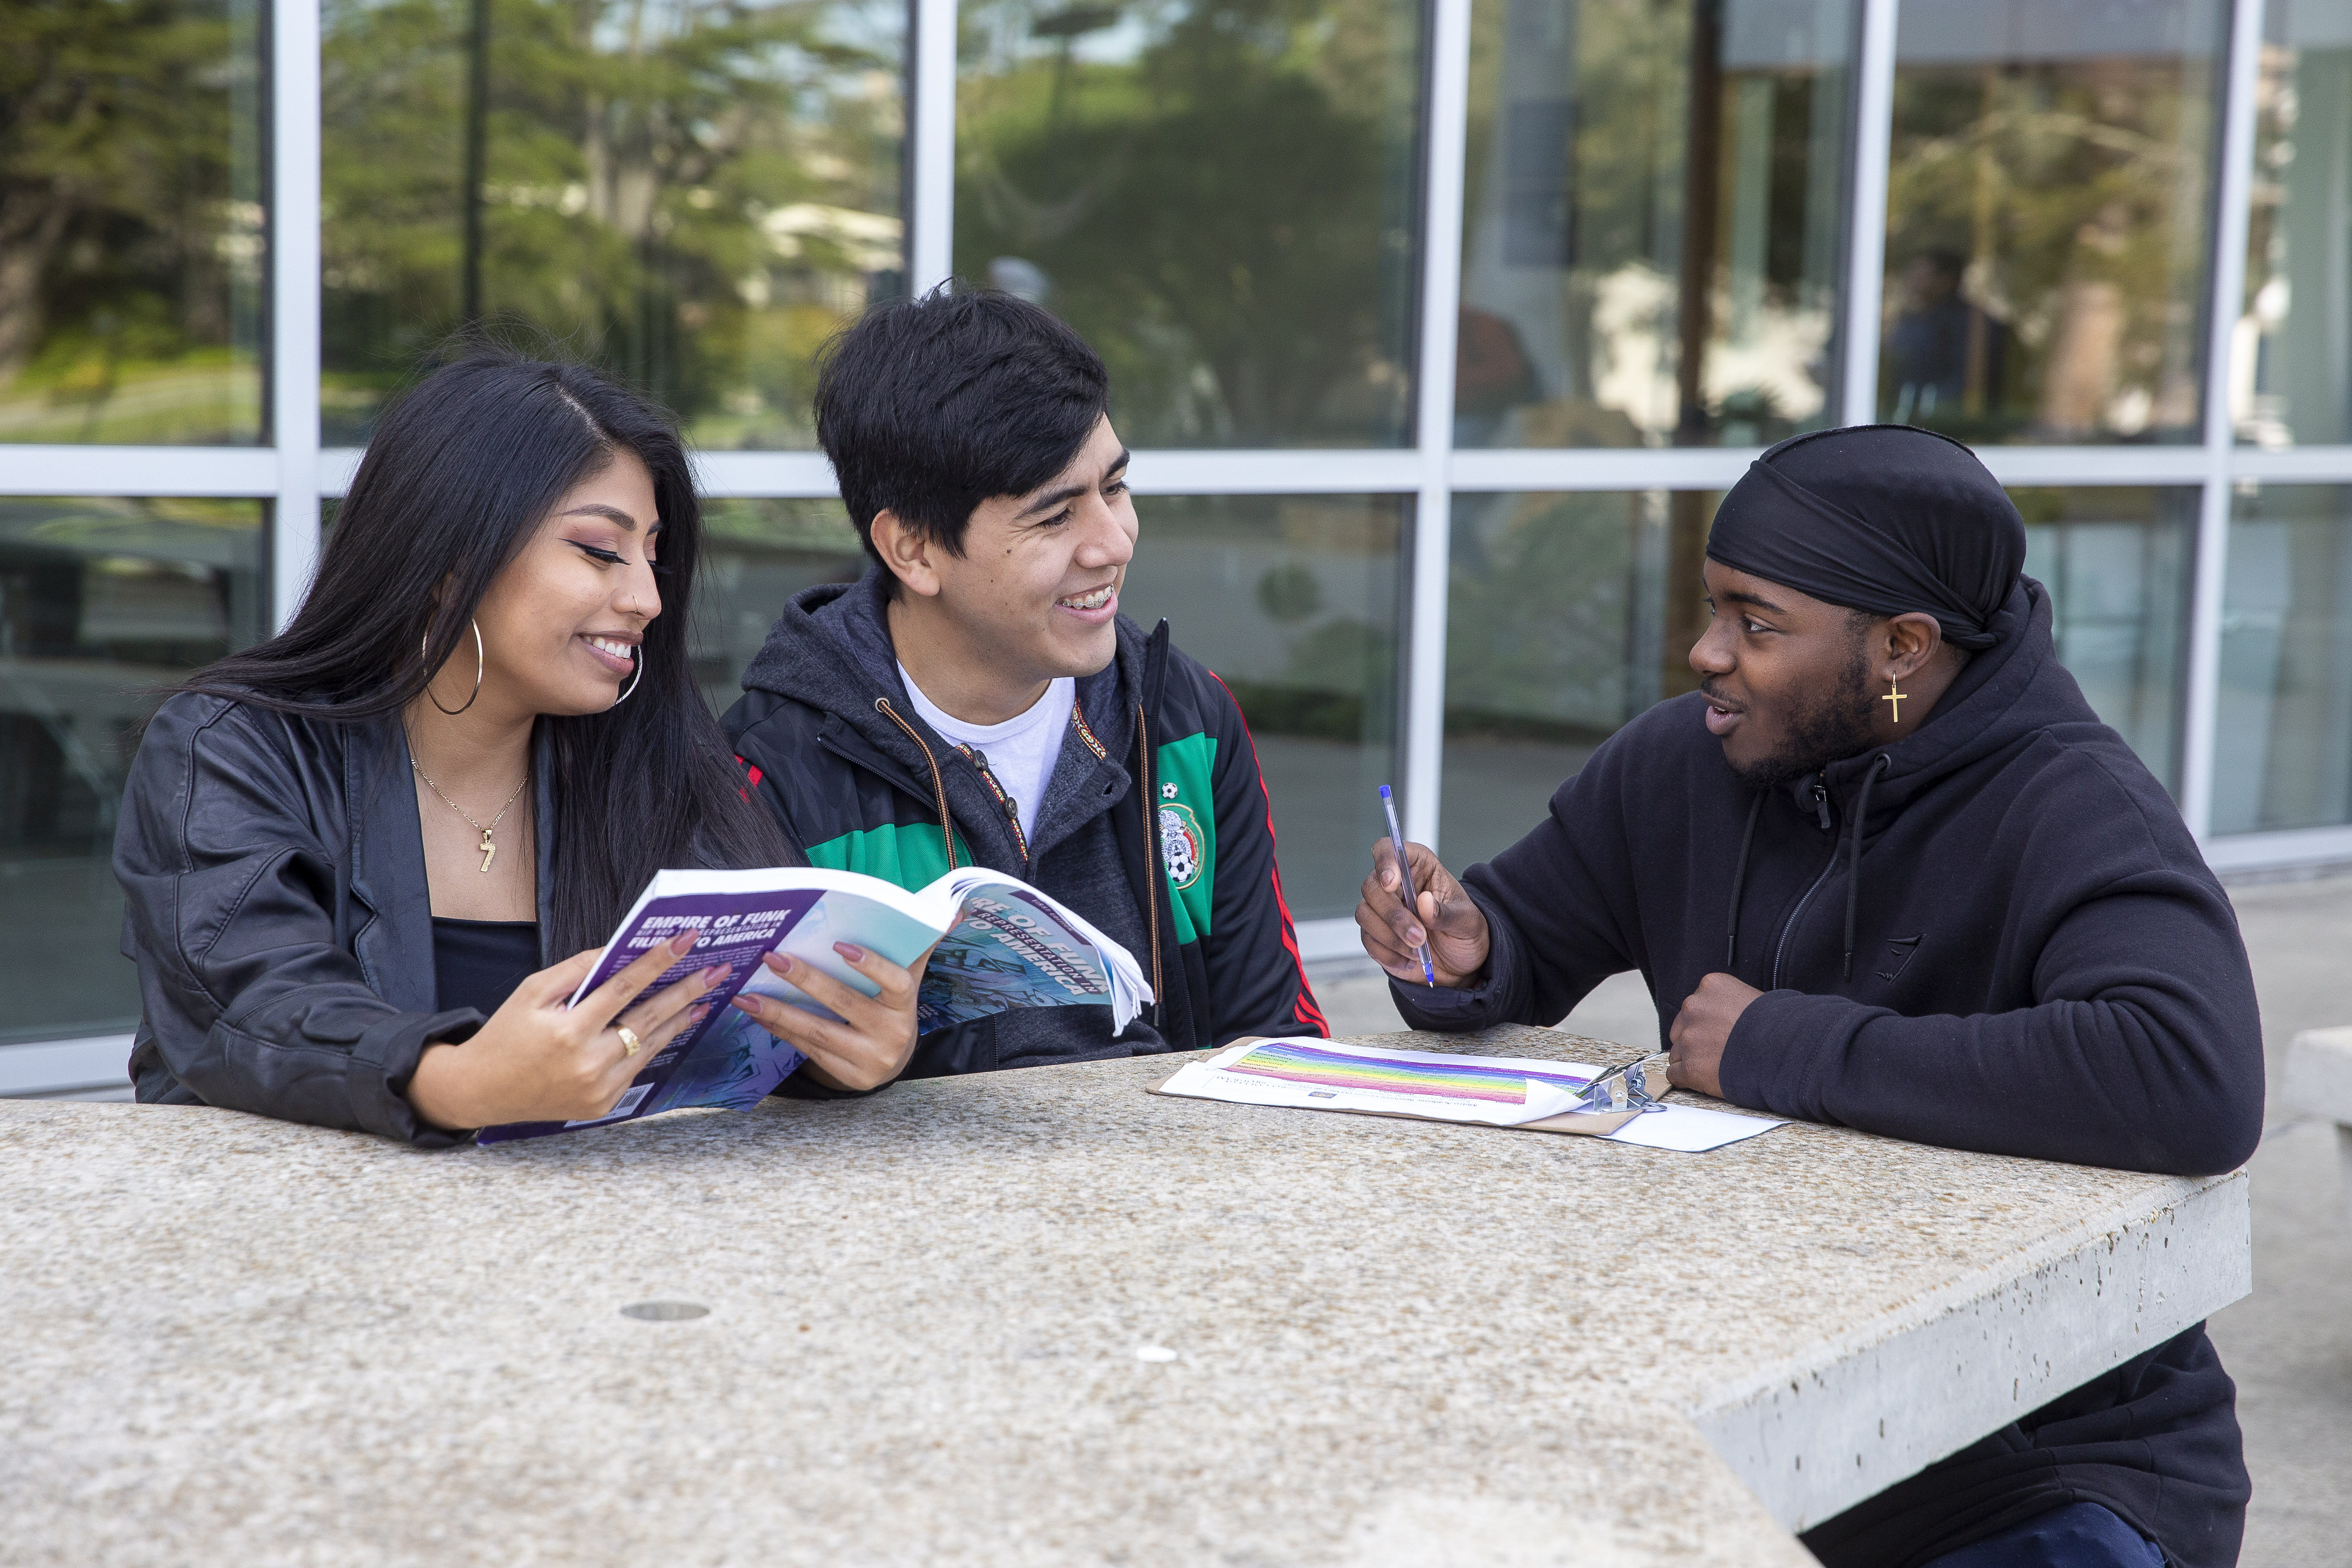 Three students studying outdoor